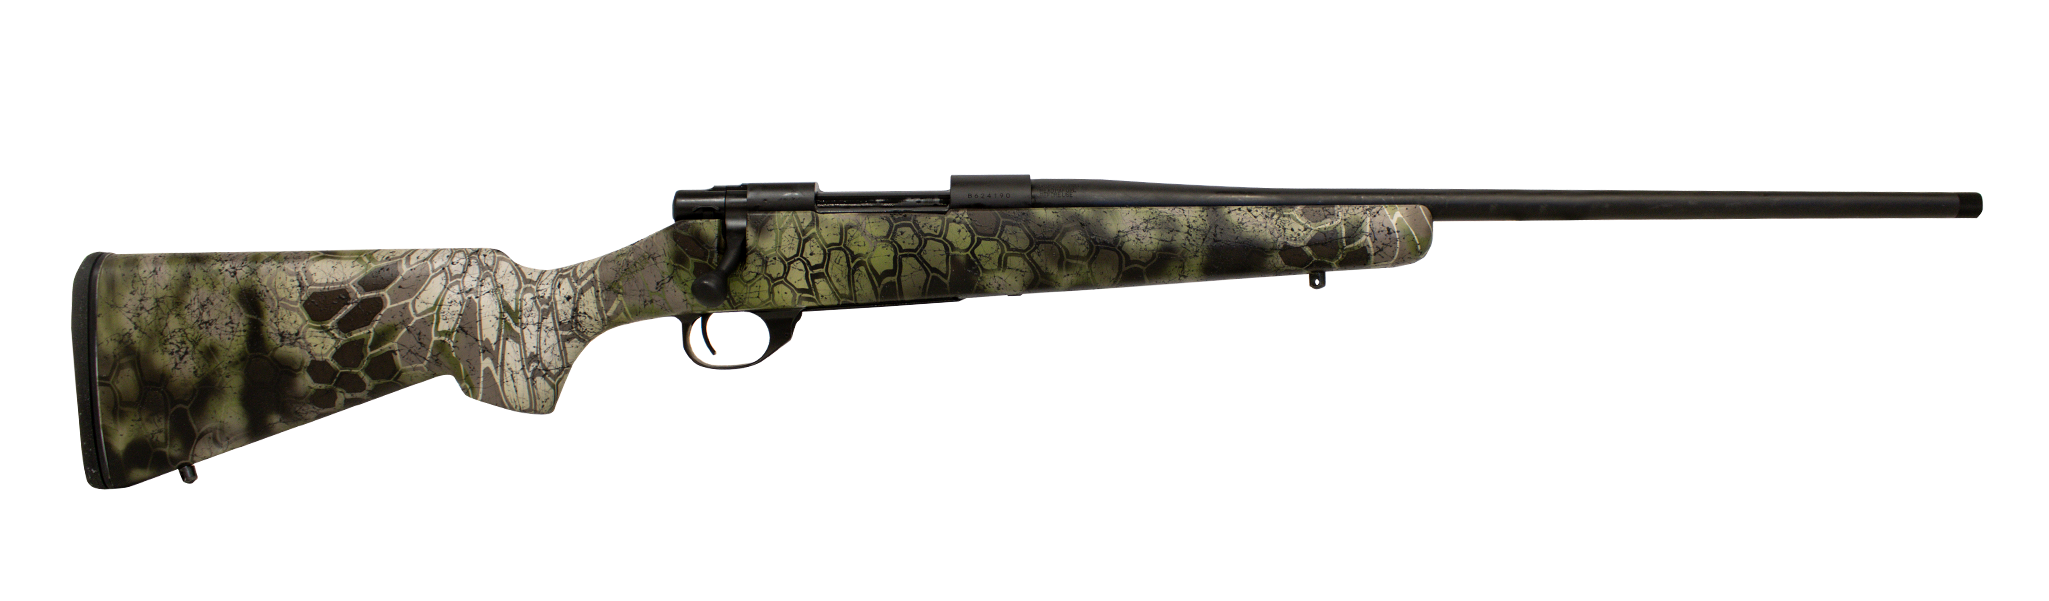 A Howa Carbon Stalker bolt-action rifle on a white background, available in 6.5 Grendel and 308